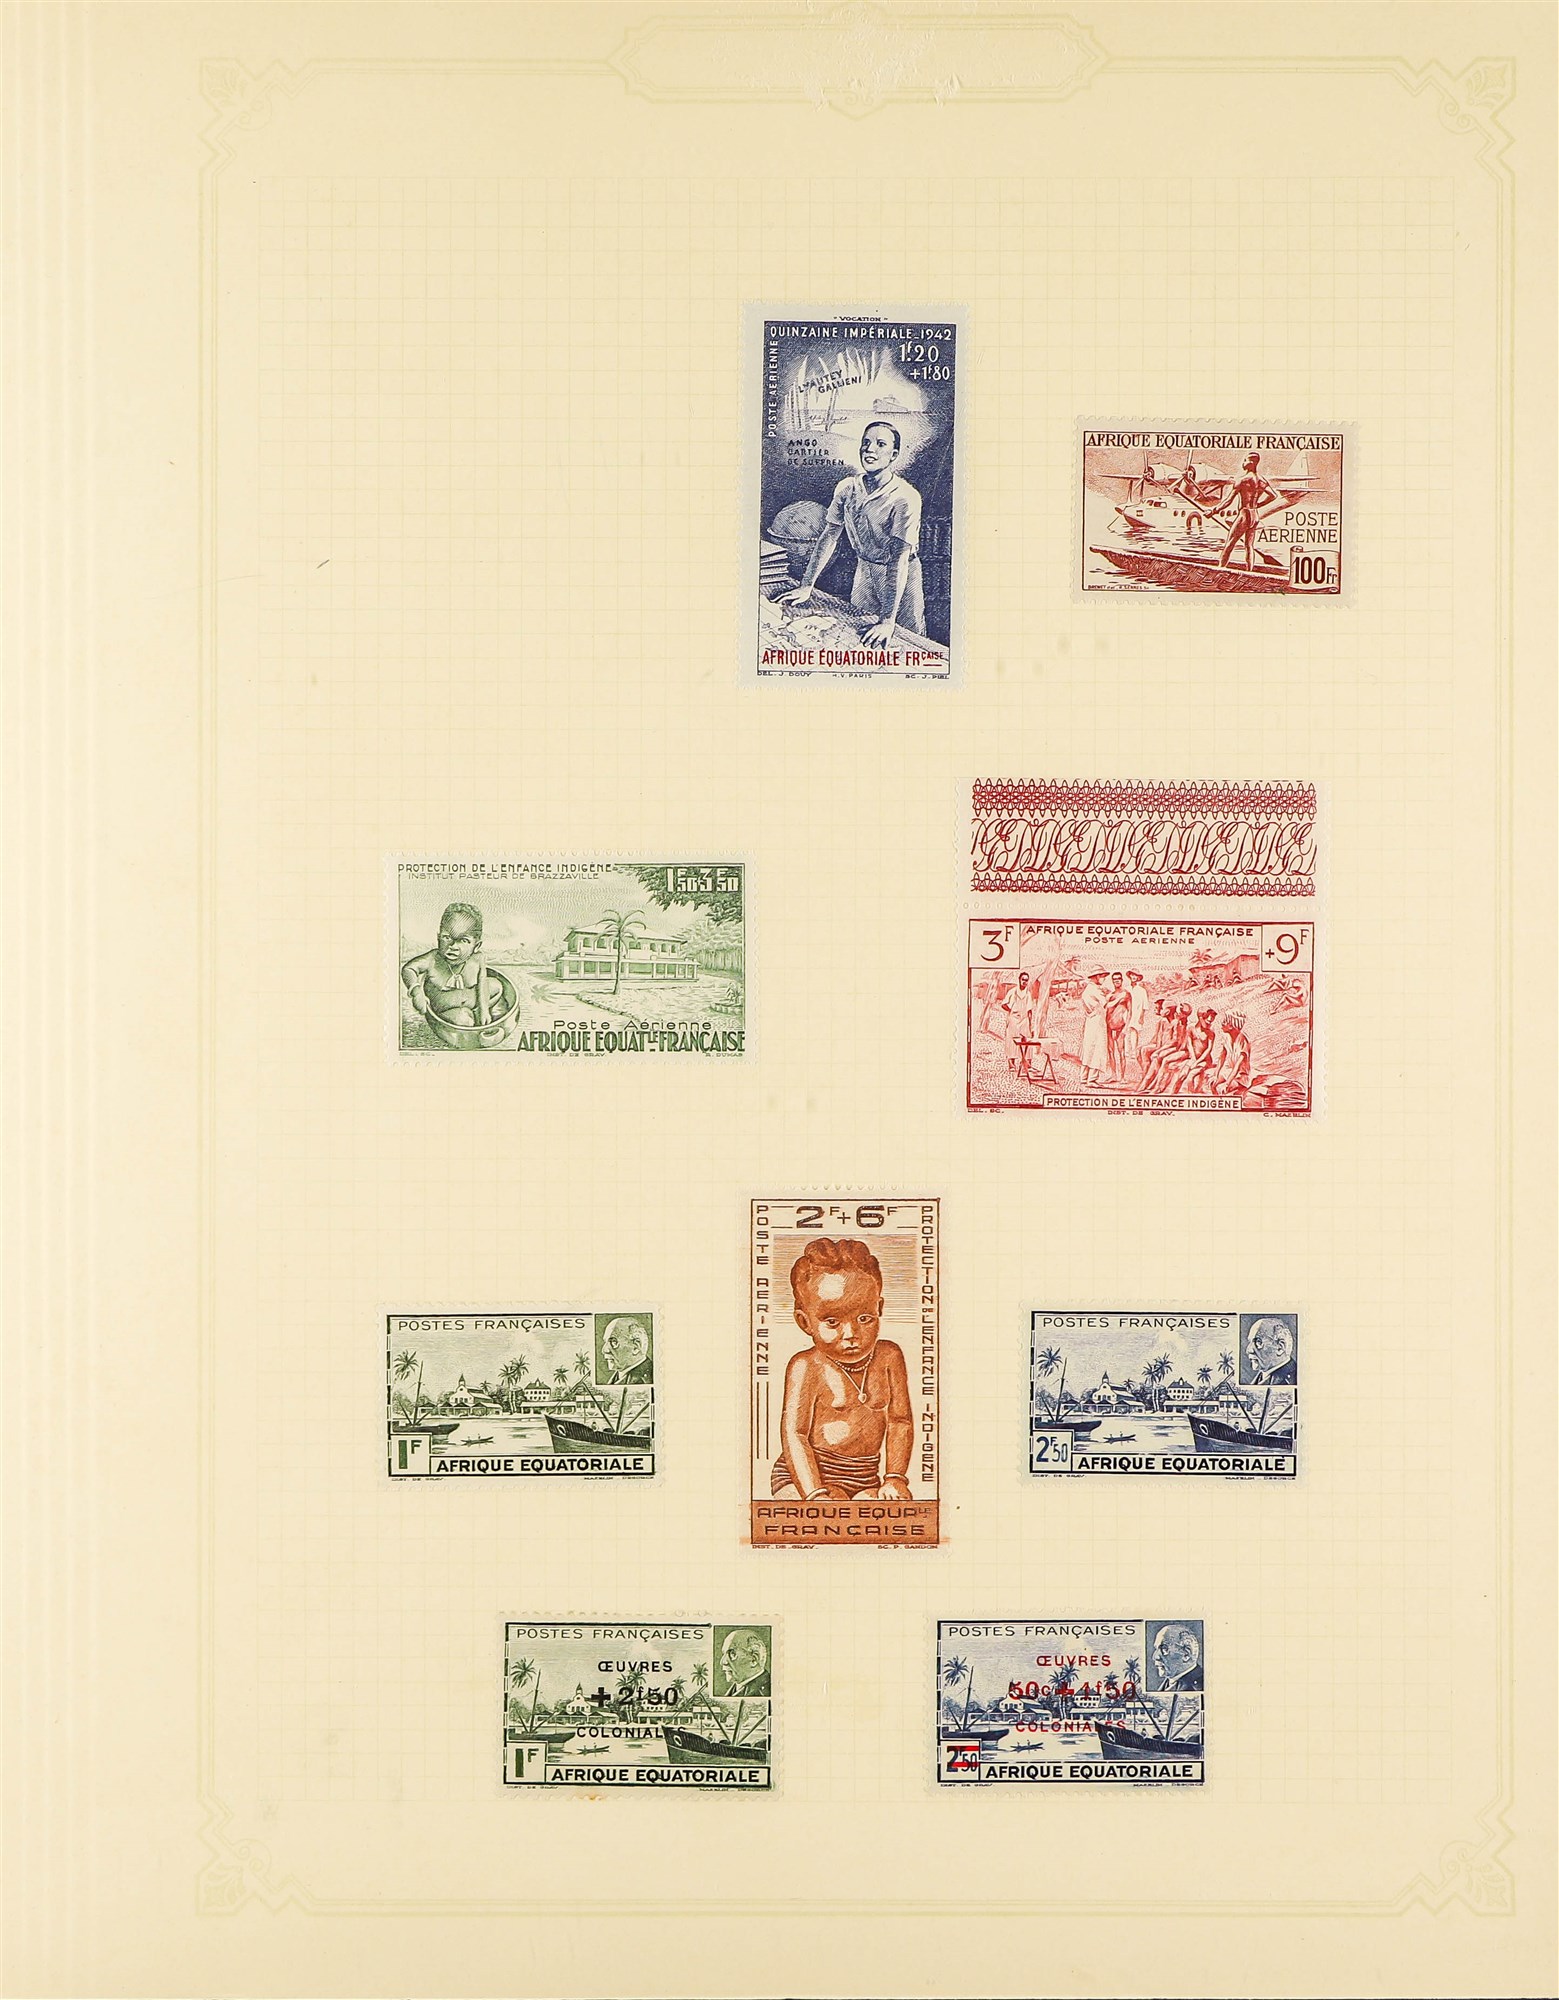 FRENCH COLONIES EQUATORIAL AFRICA 1936 - 1957 comprehensive collection of mint stamps on album pages - Image 9 of 16